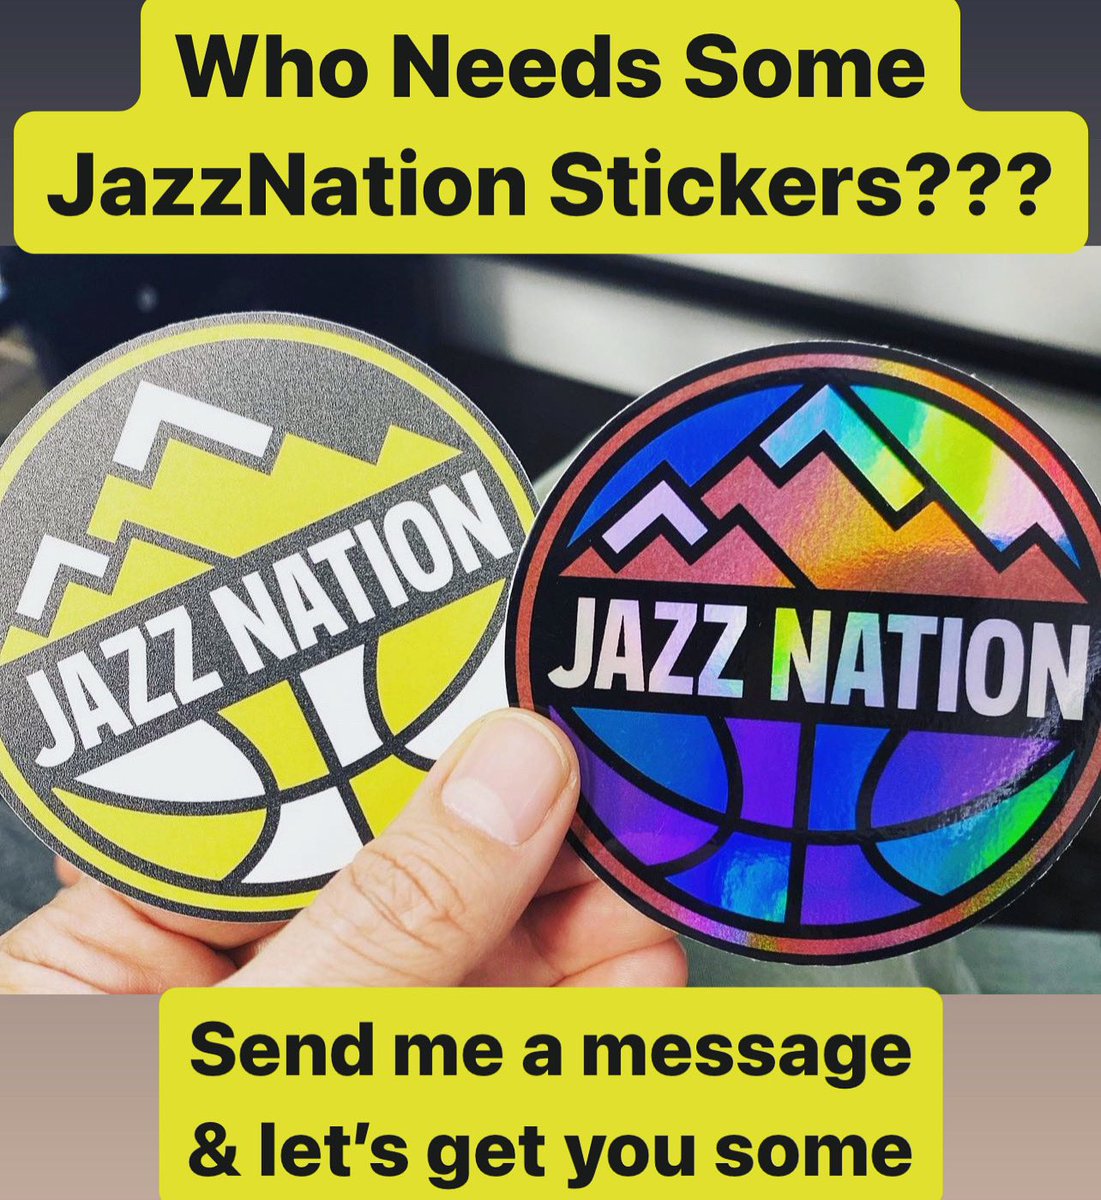 Starting to run low on stock 😳

If you need some JazzNation stickers send me a message & let’s get these in your hands

Everyone who gets em’ .. loves em’
They are 🔥🔥🔥

.
.
.
#JazzNation #UtahJazz #TakeNote
#GoJazz #Utah #NBA